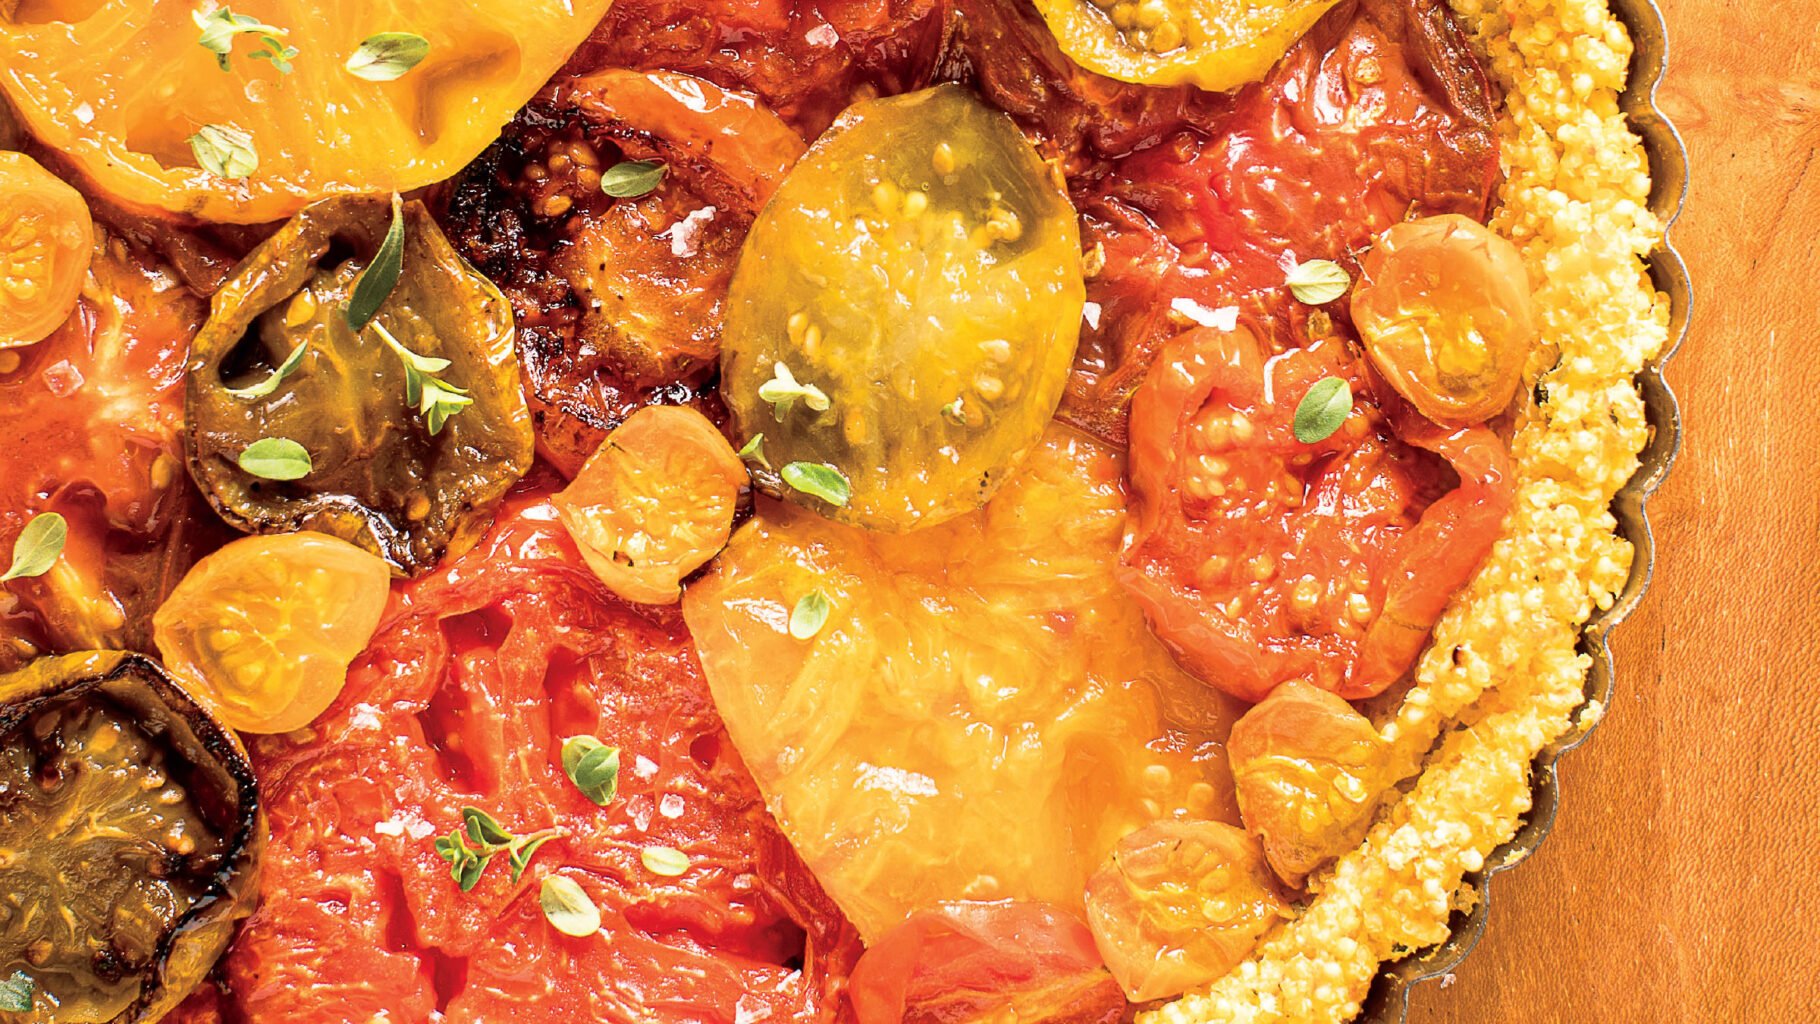 Roasted Heirloom Tomato and Millet Tart recipe Excerpted from Nourish: Plant-Based Recipes To Feed Body Mind And Soul by Terry Walters